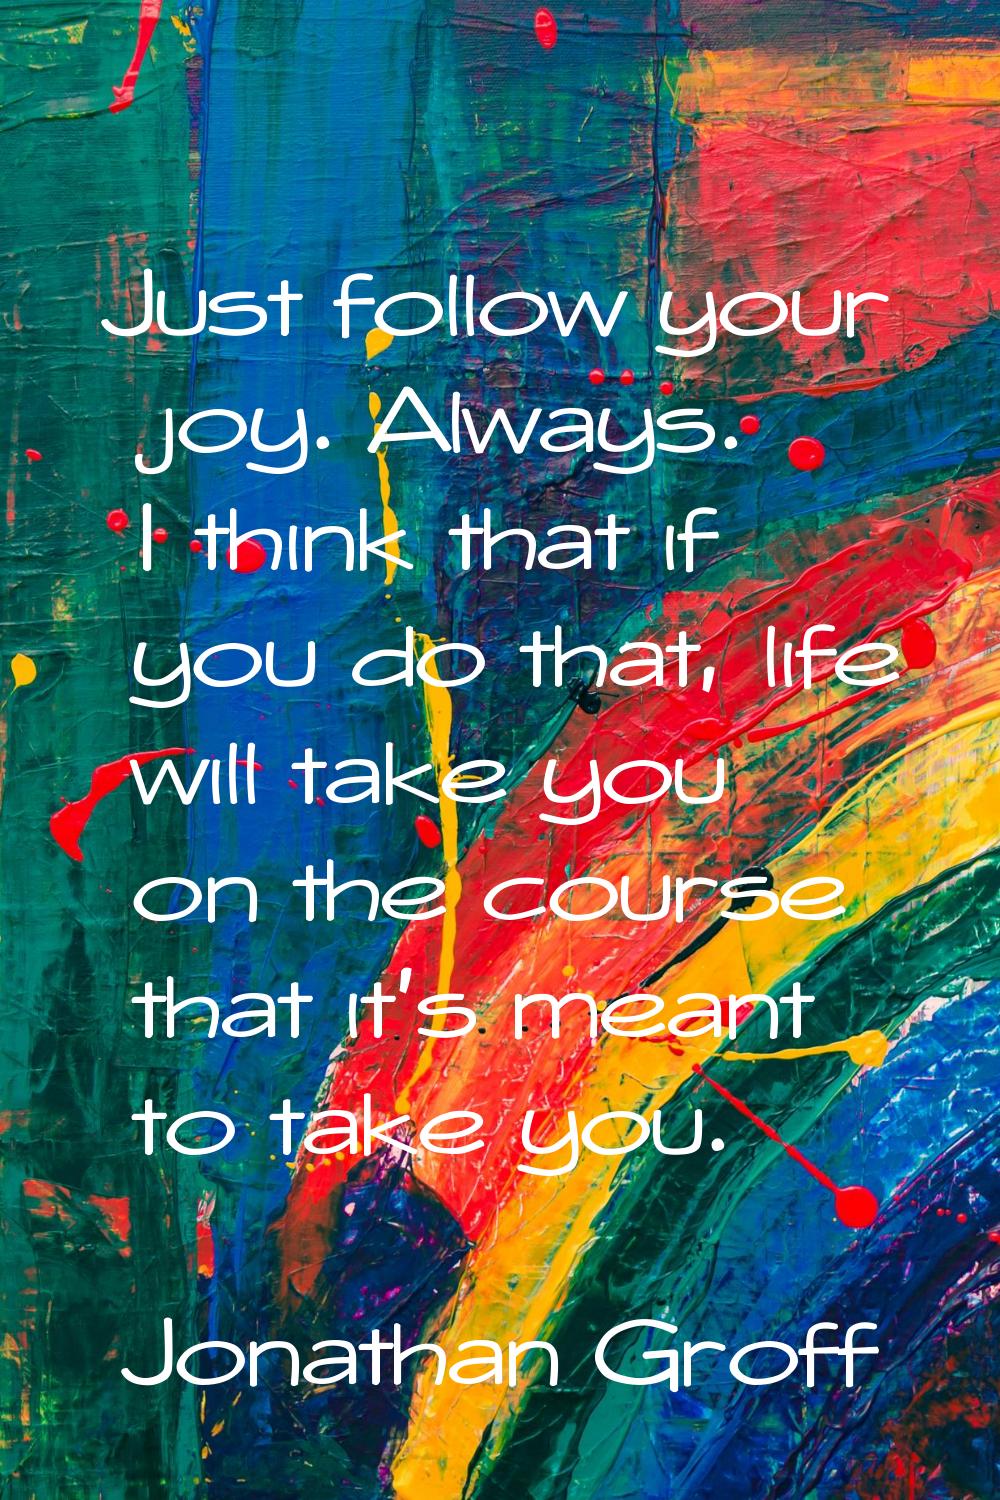 Just follow your joy. Always. I think that if you do that, life will take you on the course that it